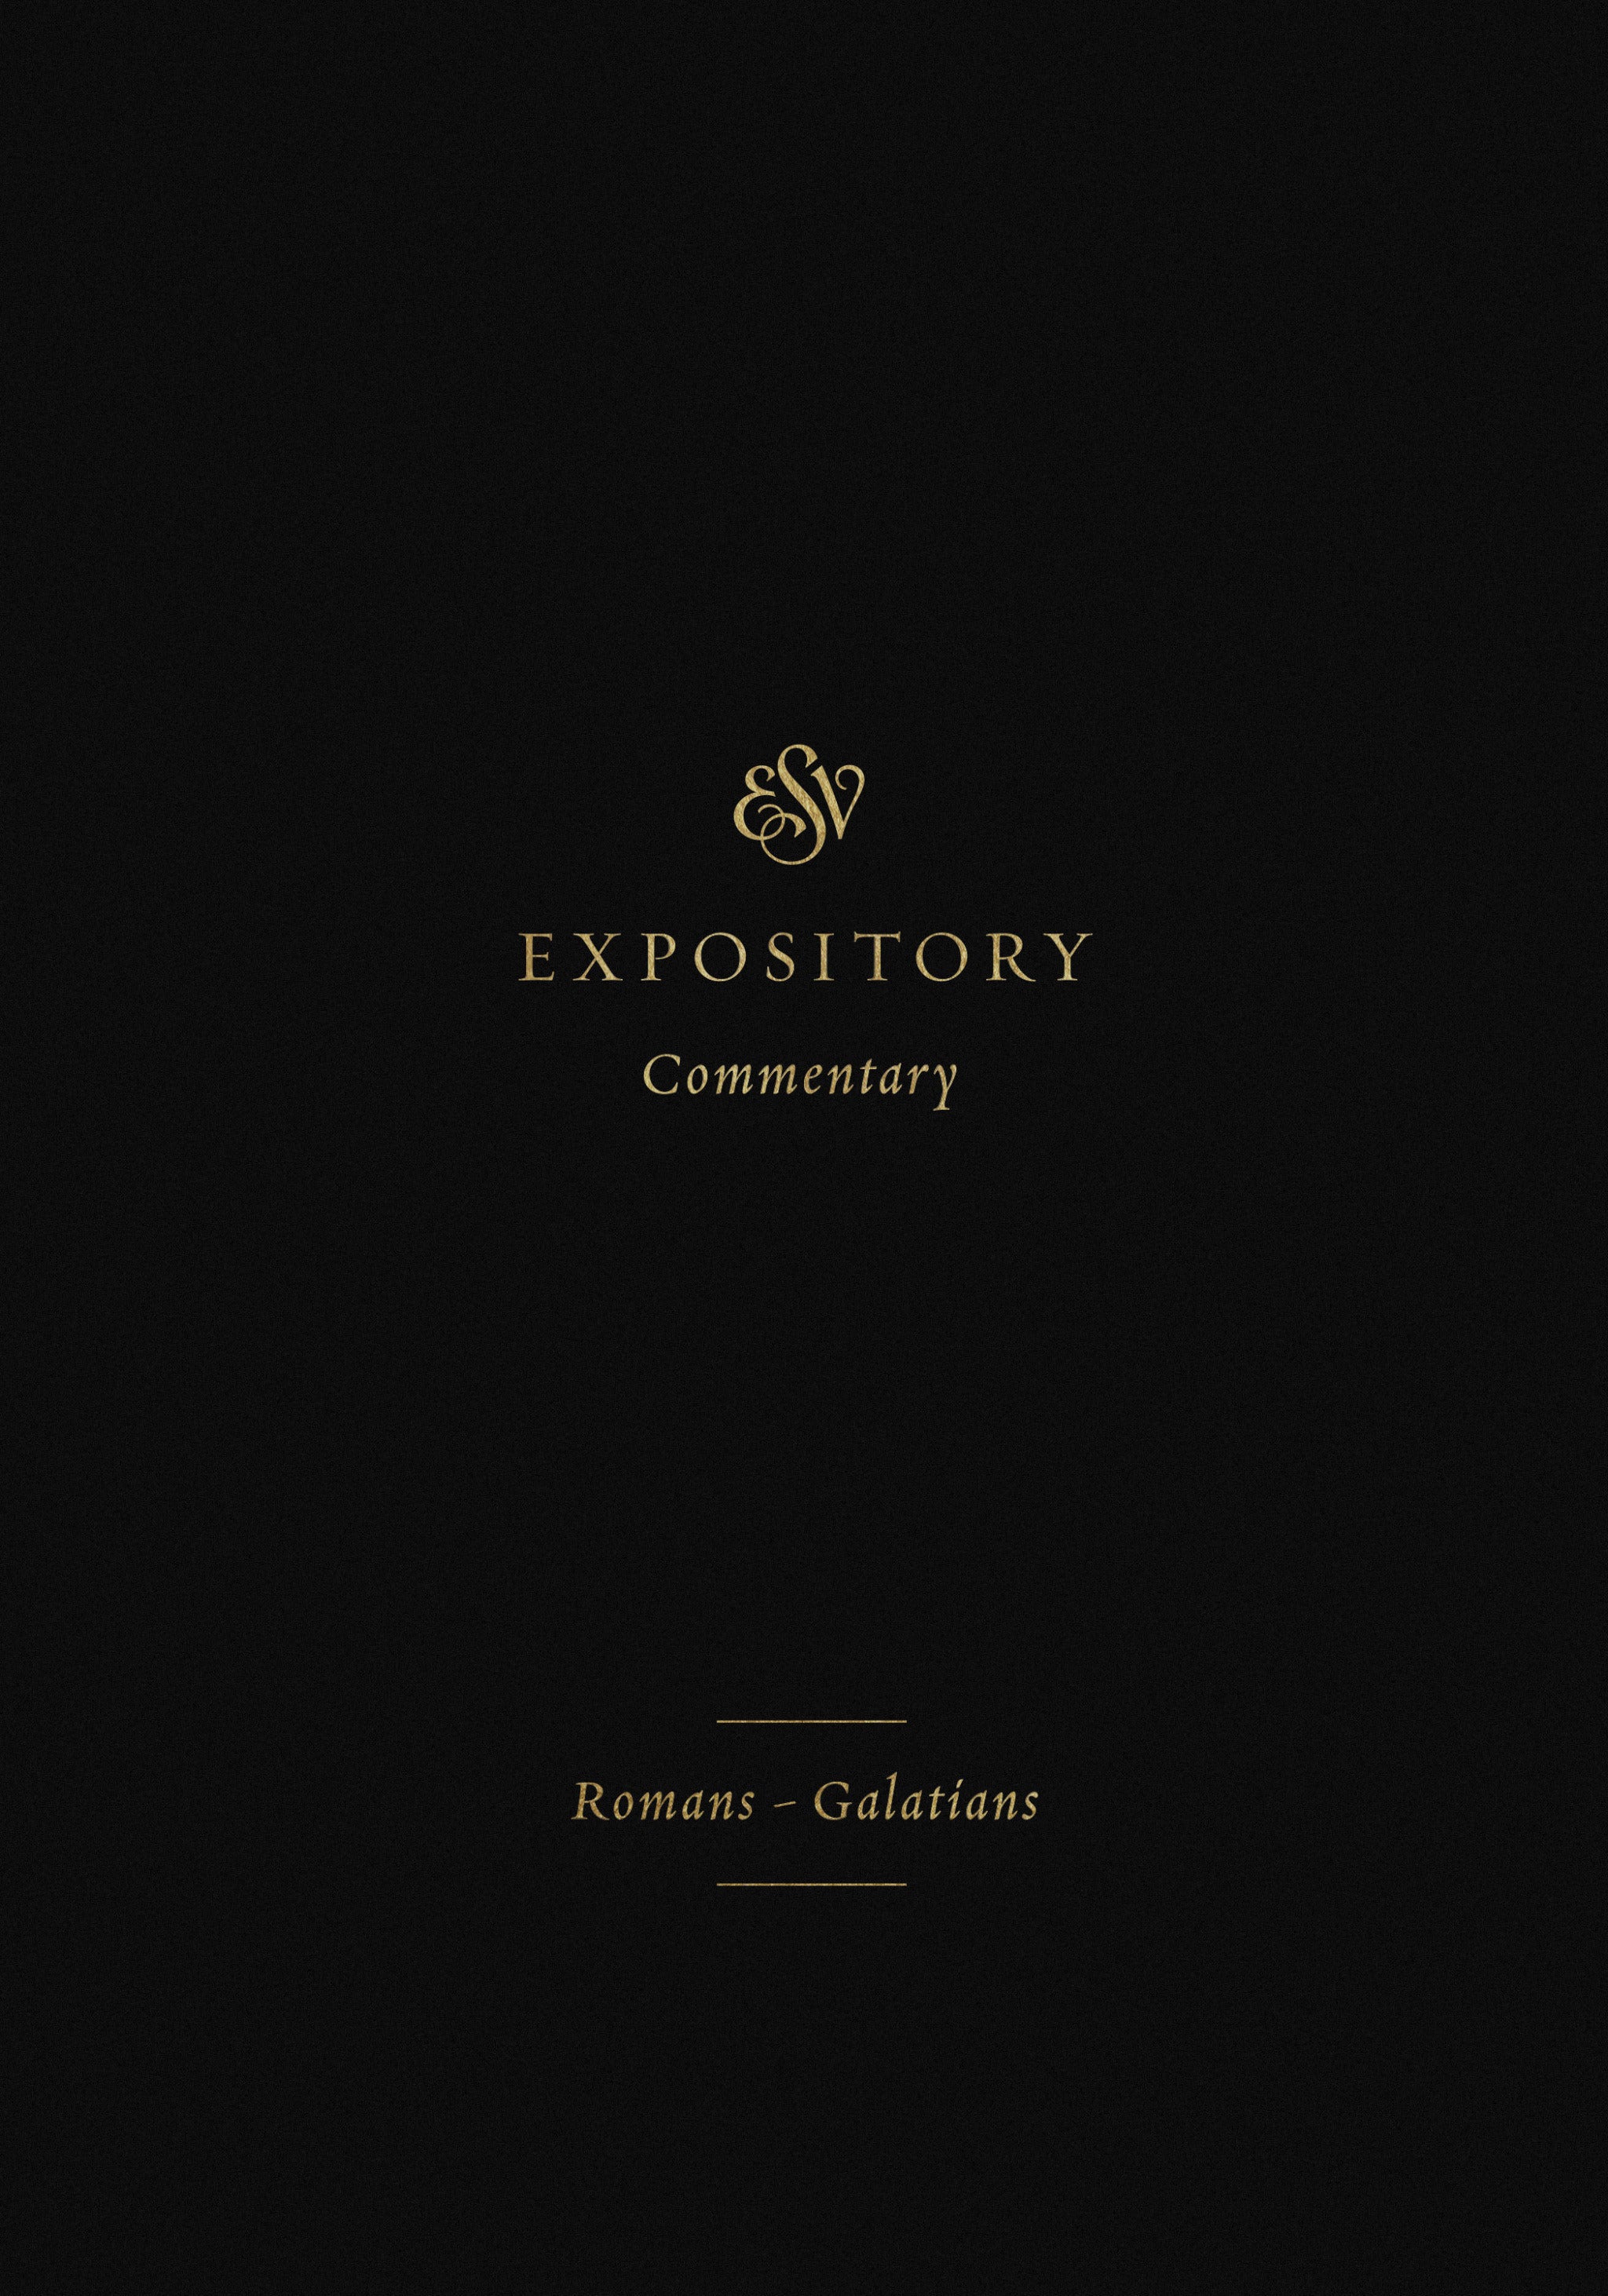 Image of ESV Expository Commentary (Volume 10) other